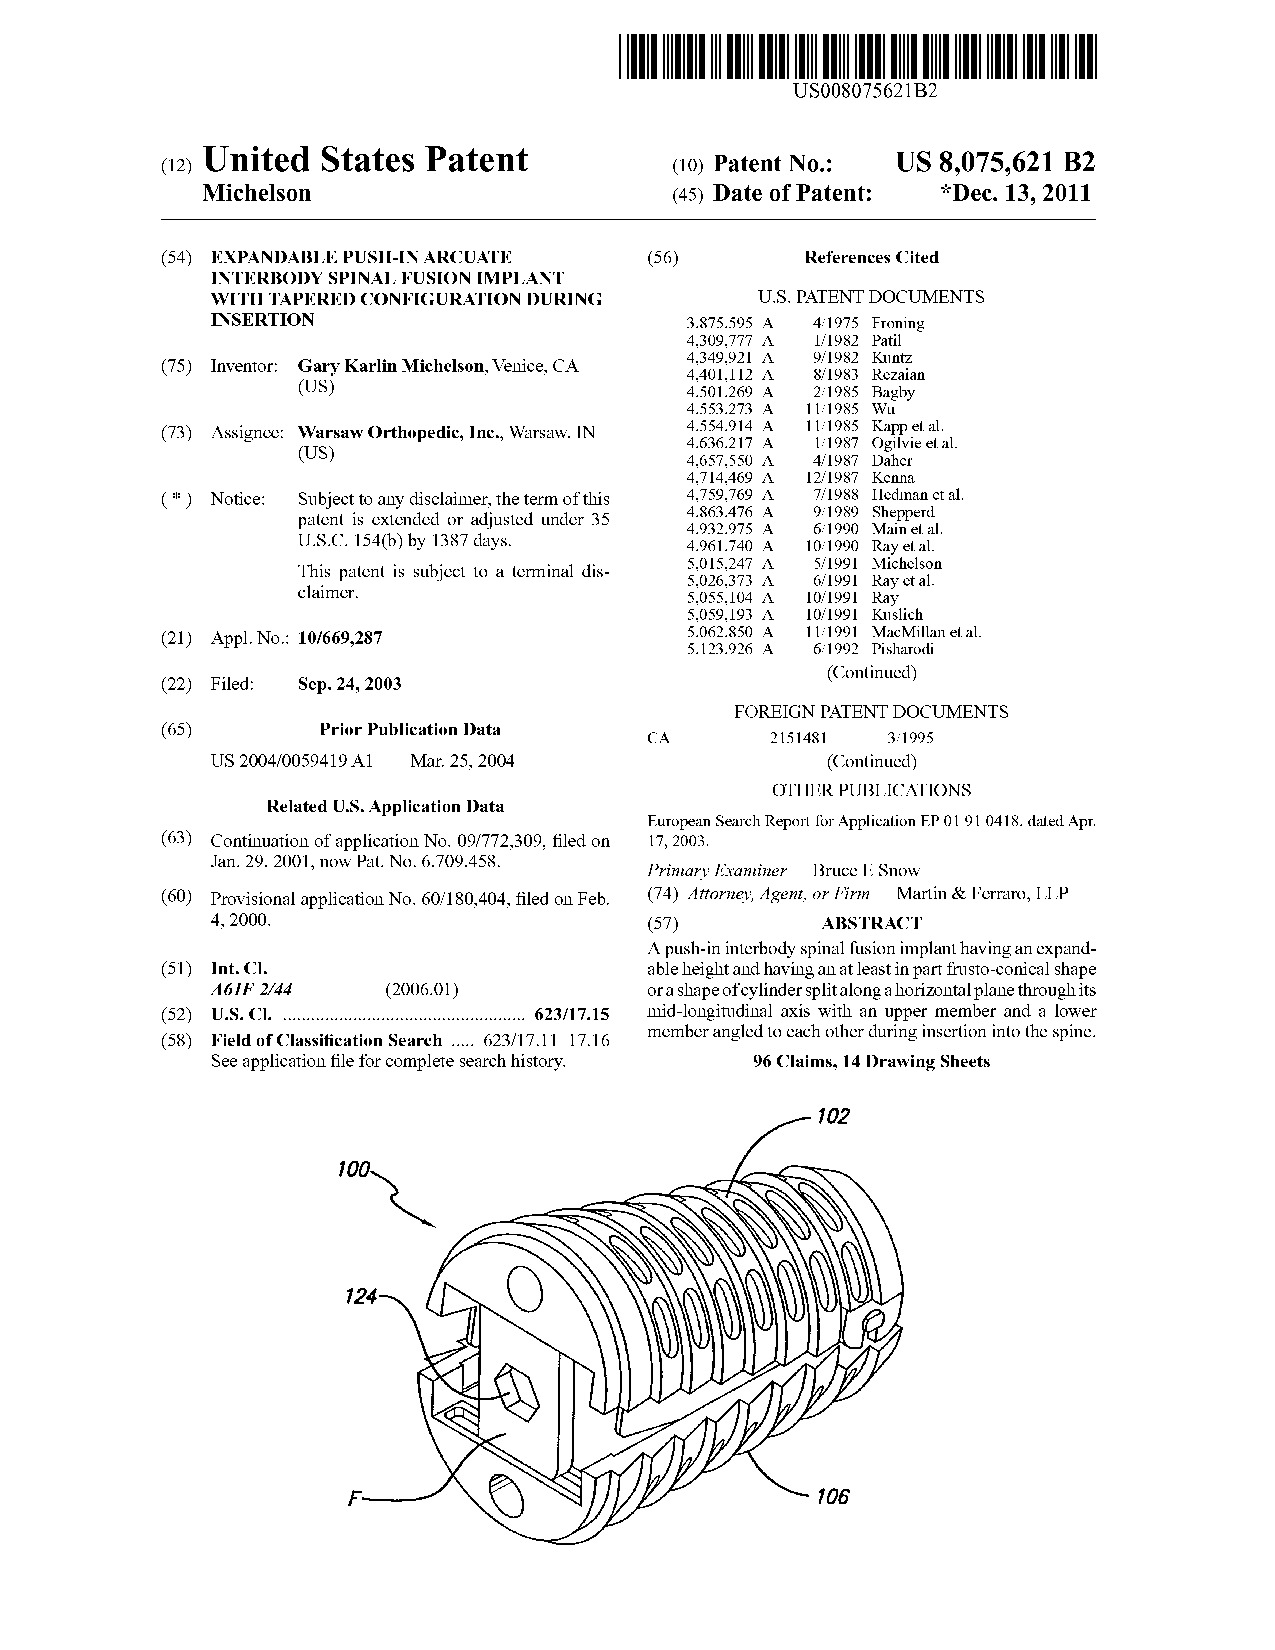 Expandable push-in arcuate interbody spinal fusion implant with tapered     configuration during insertion - Patent 8,075,621